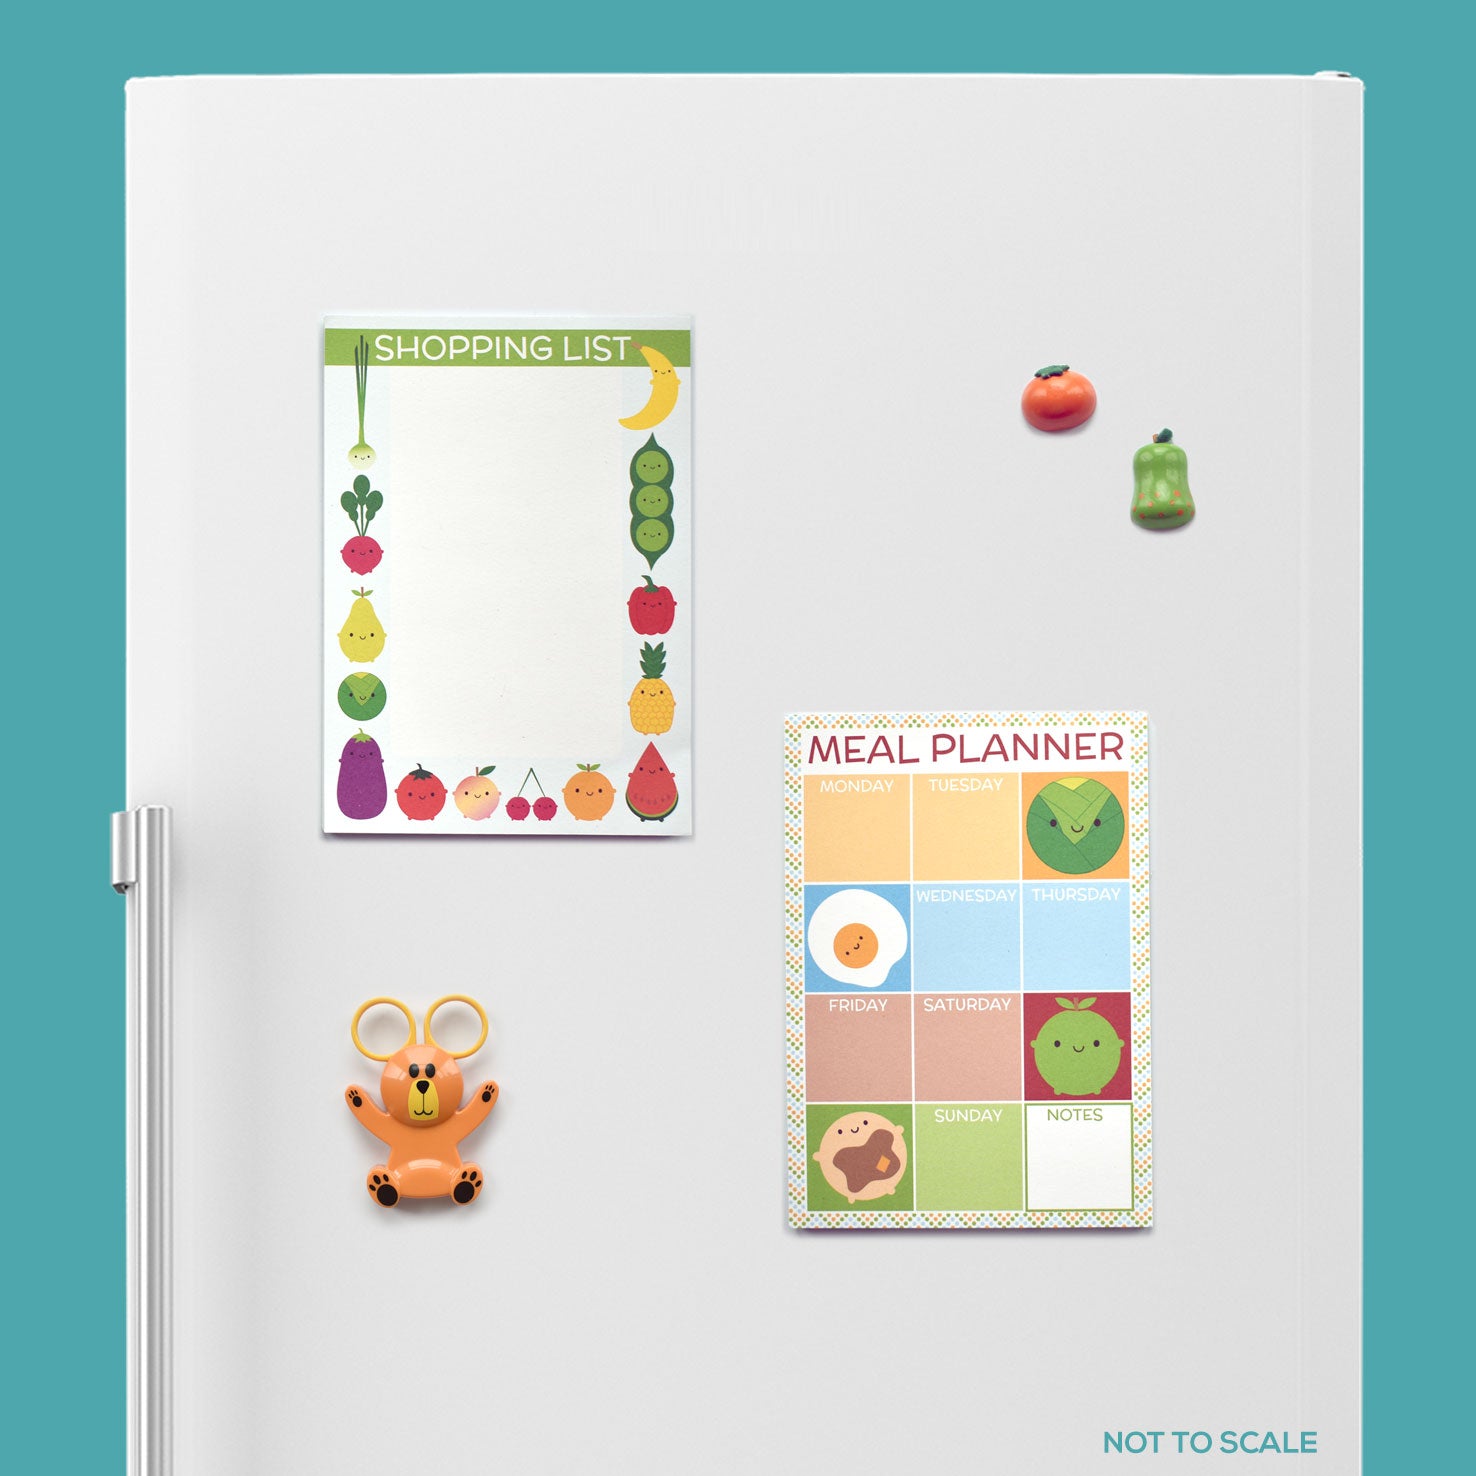 Meal Planner and shopping list notepads displayed on a fridge door together